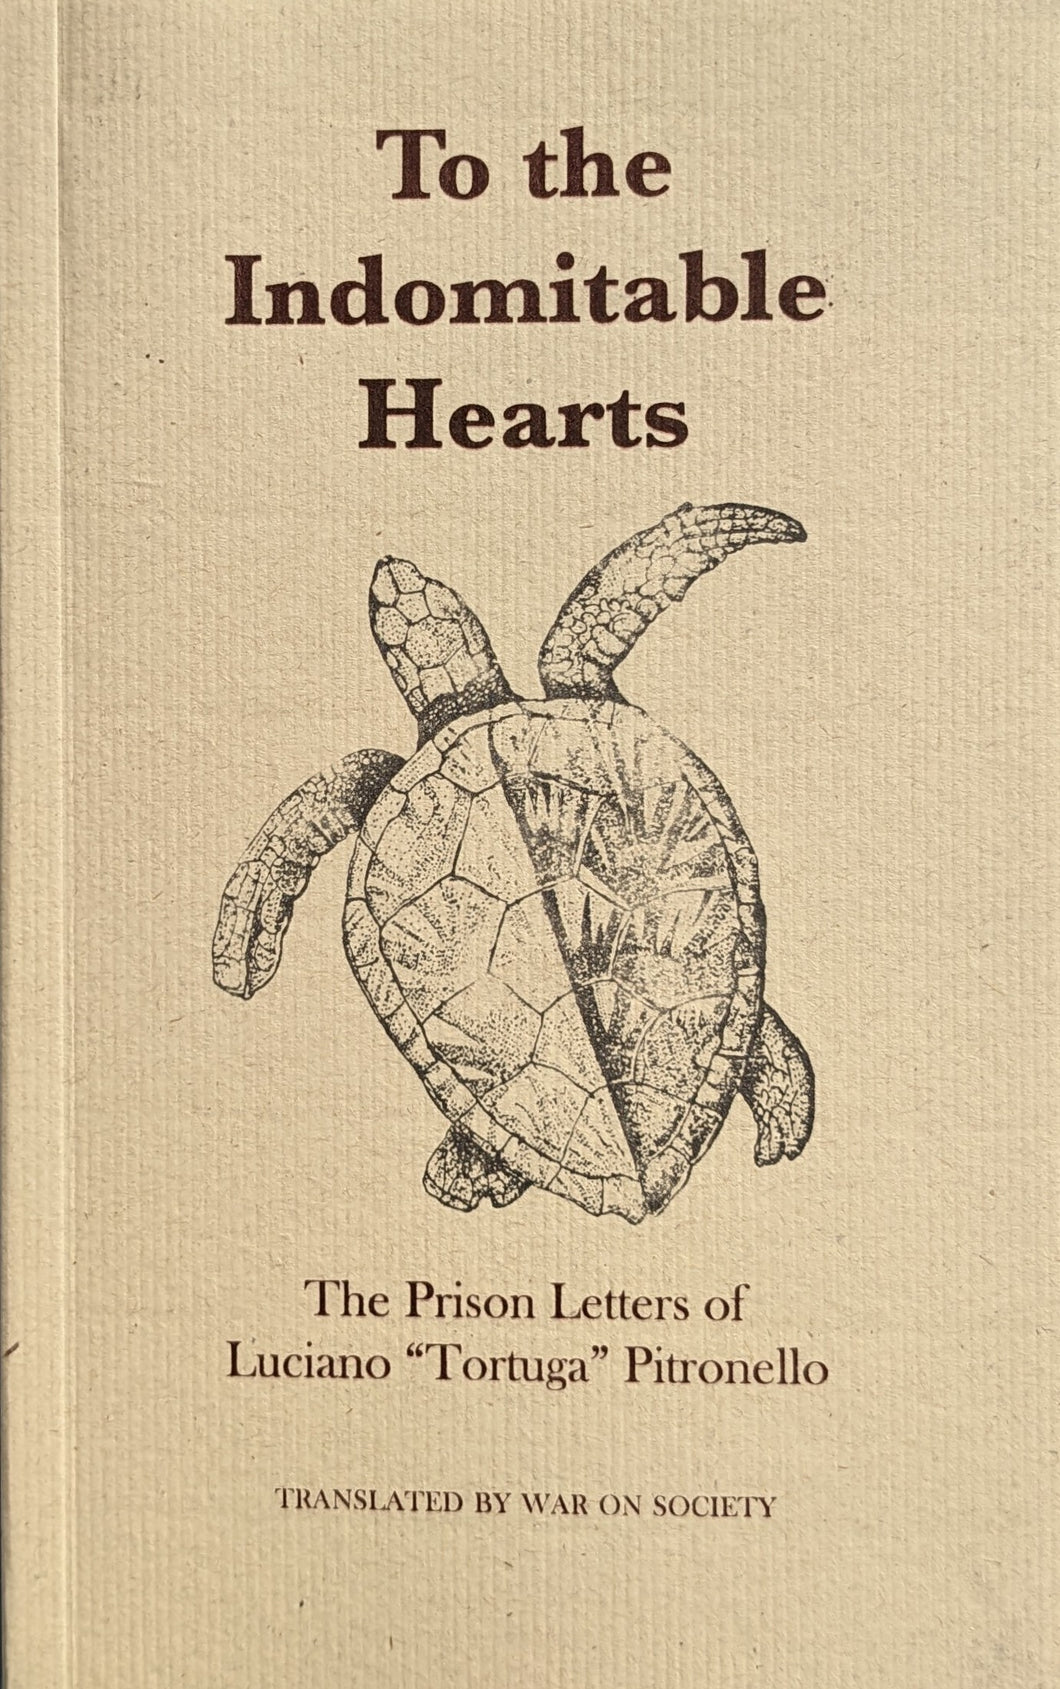 To the Indomitable Hearts: The Prison Letters of Luciano 